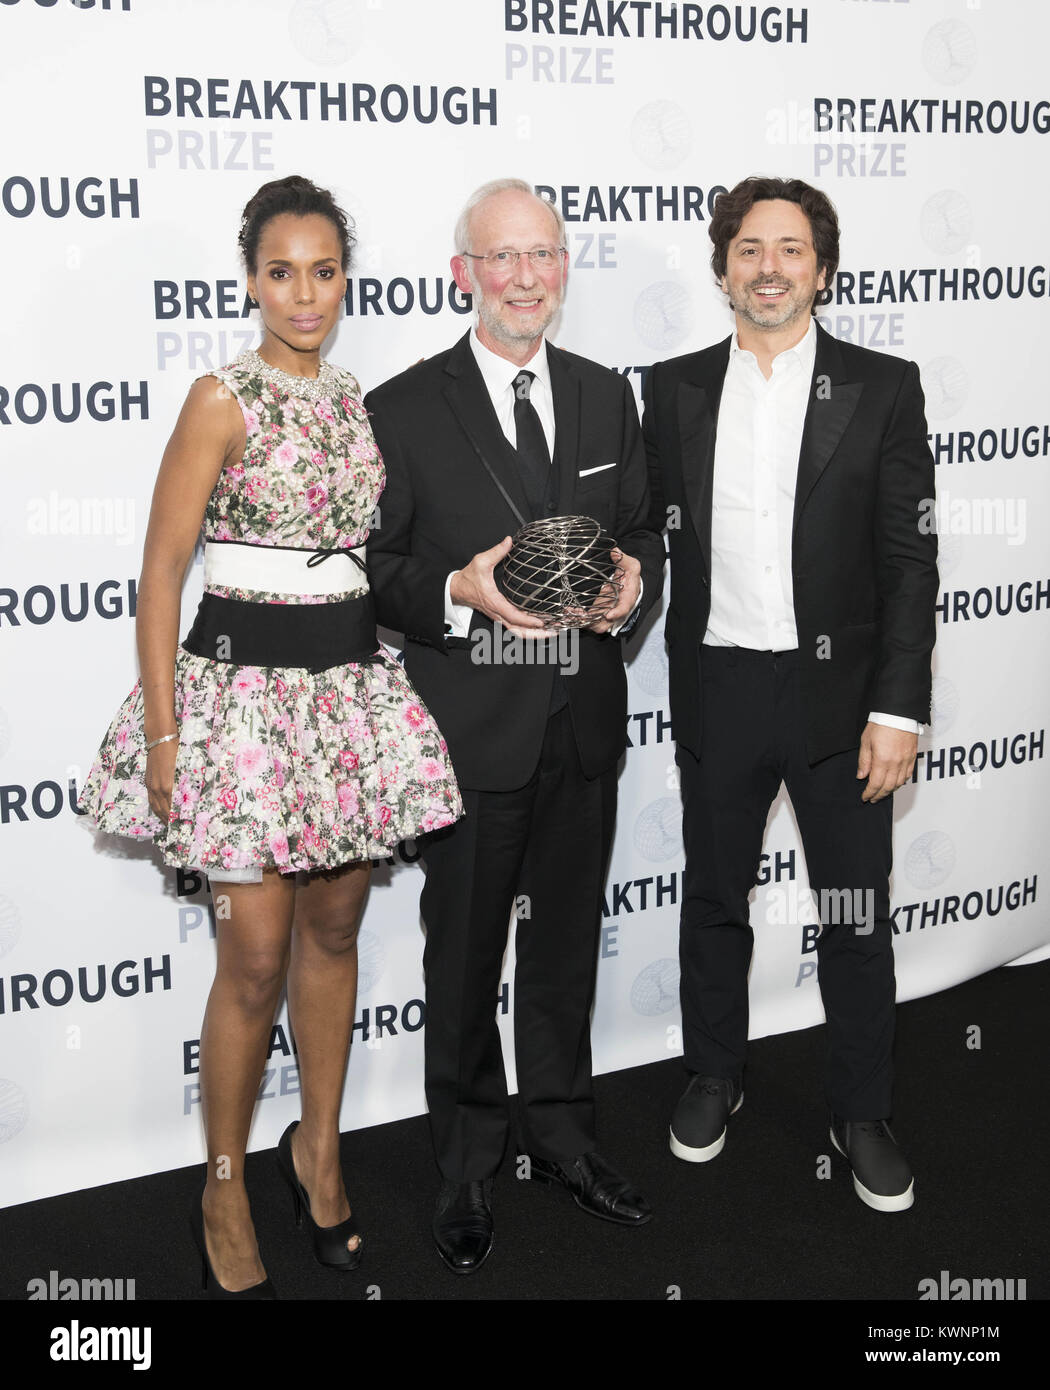 Stars of Screen, Stage and Sport Gather in Silicon Valley to Celebrate Science at 6th Annual 'Breakthrough Prize'  Featuring: Kerry Washington, Dr. Don Cleveland, Sergey Brin Where: Menlo Park, California, United States When: 03 Dec 2017 Credit: Drew Altizer/WENN.com Stock Photo